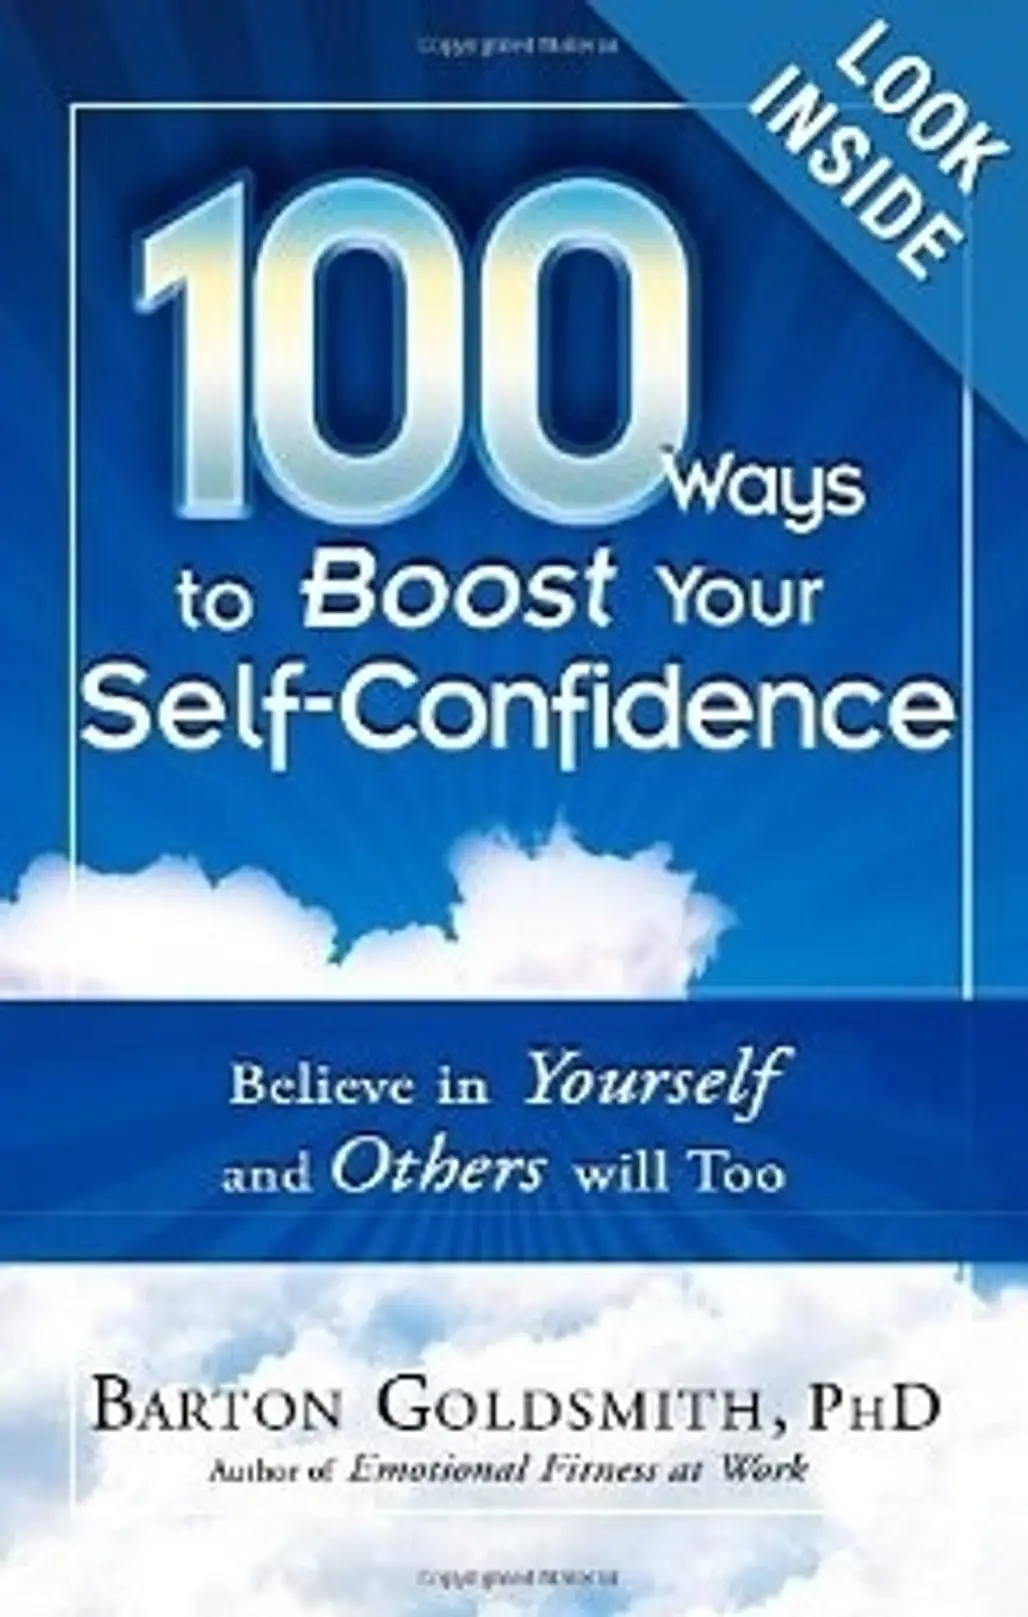 Barton Goldsmith - 100 Ways to Boost Your Self-Confidence